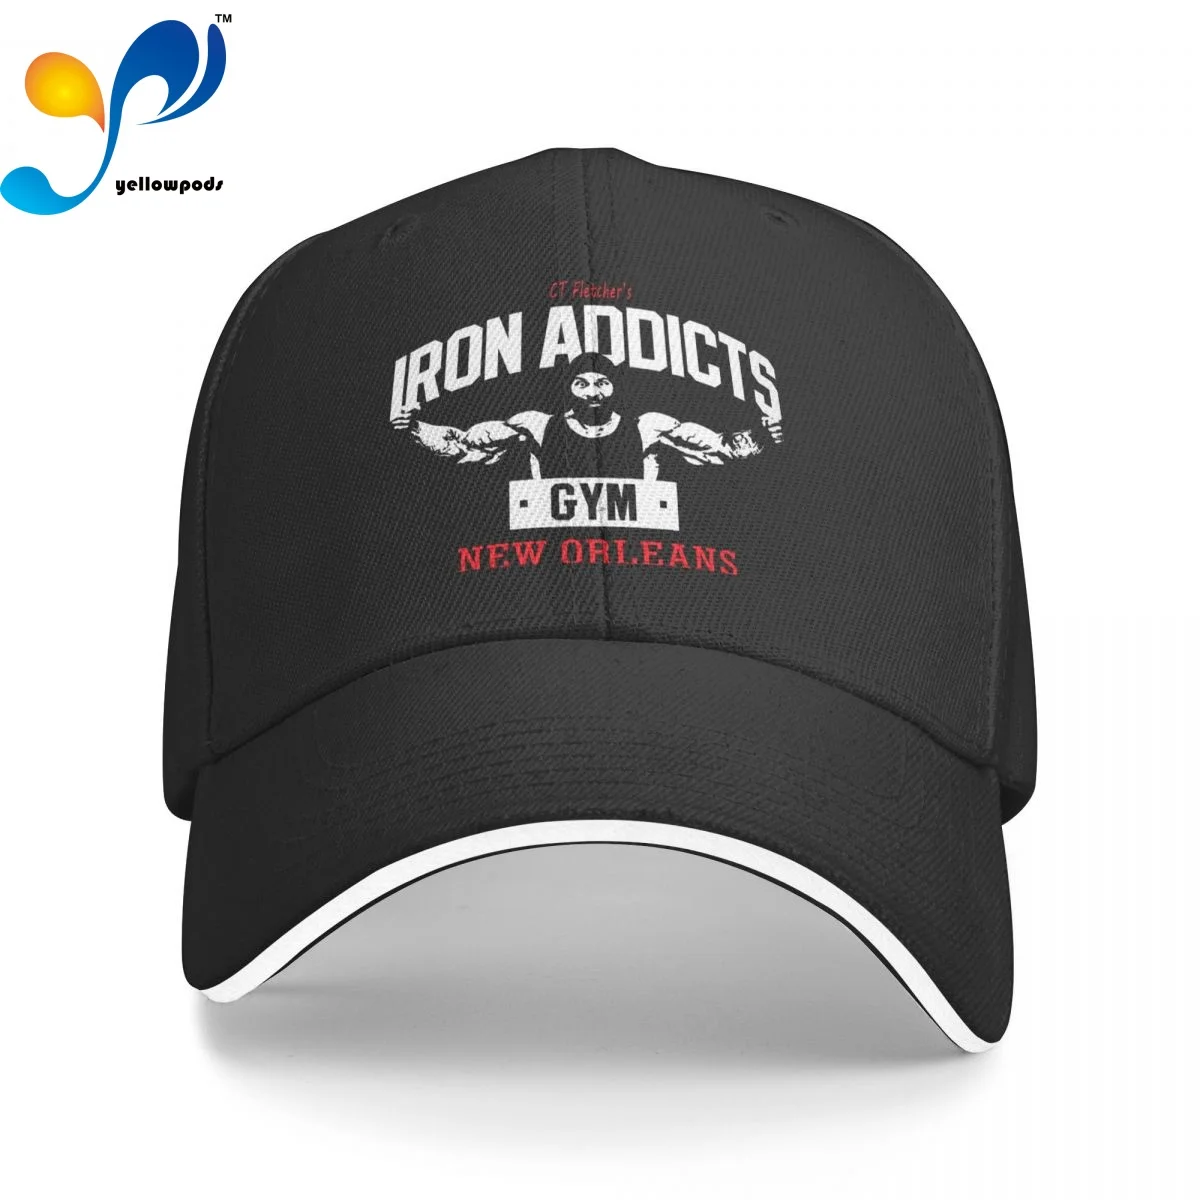 

Baseball Cap Men CT Fletcher Iron Adoicts New Orleans Fashion Caps Hats for Logo Asquette Homme Dad Hat for Men Trucker Cap